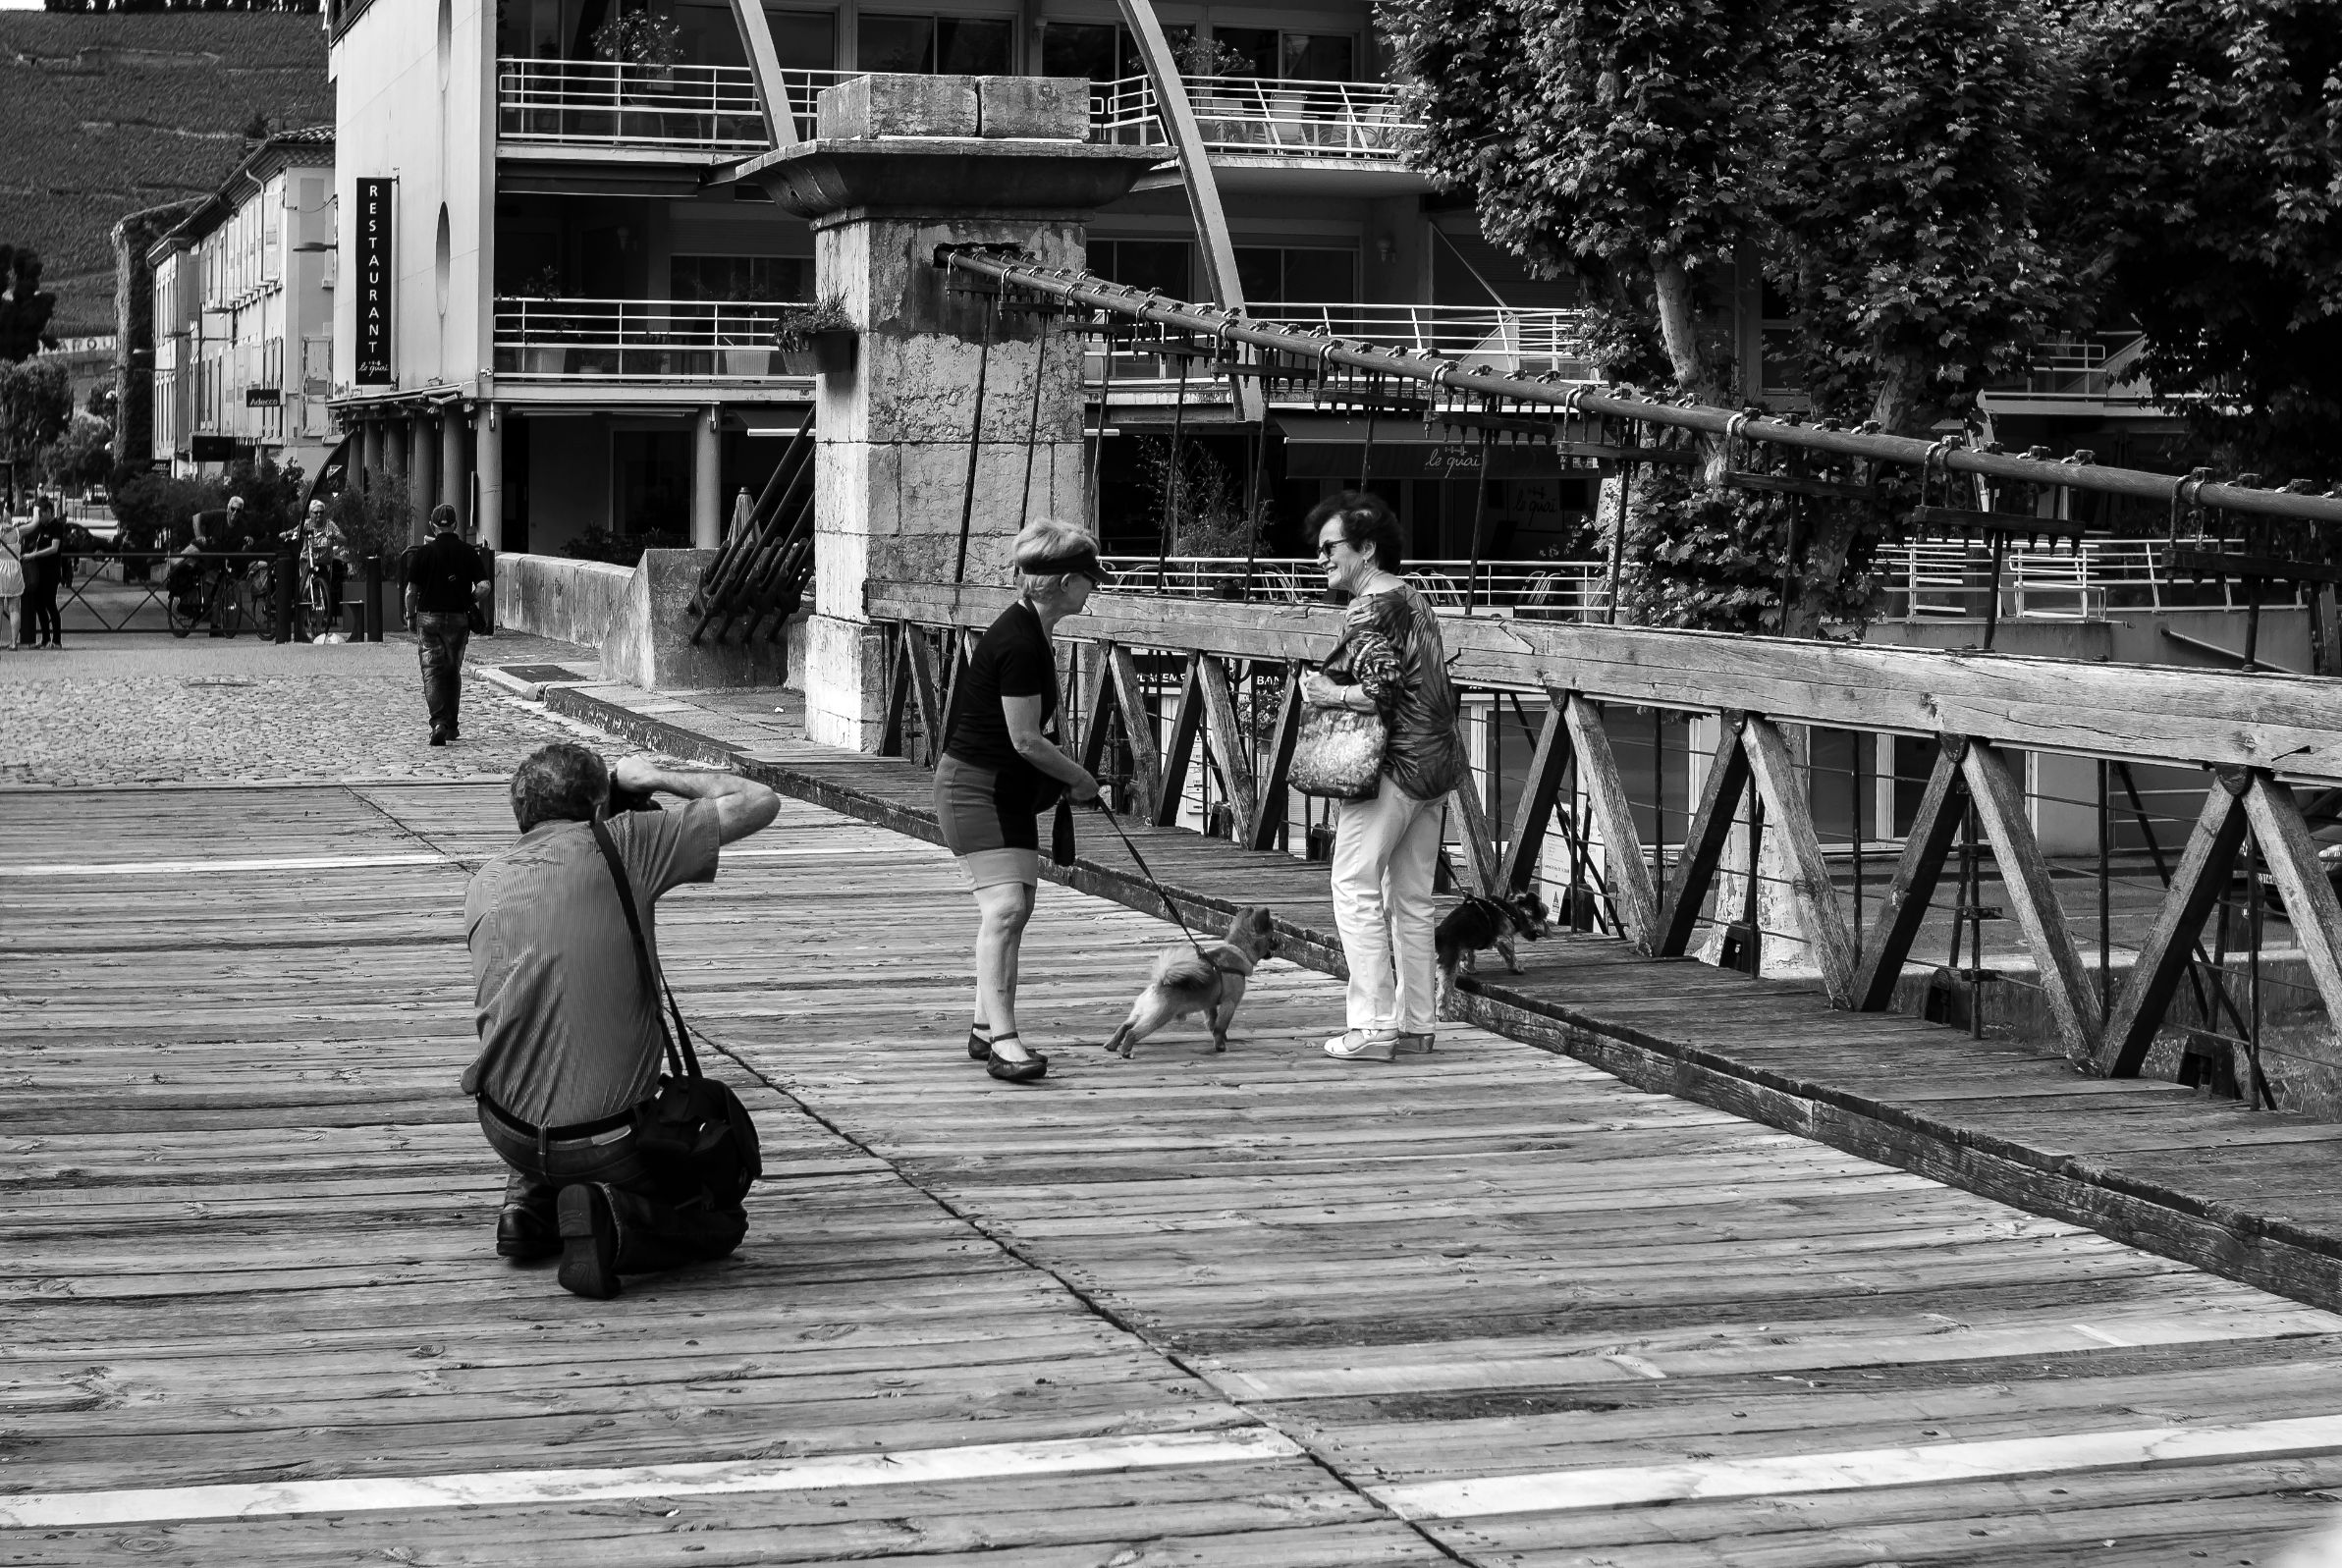 Tournon-sur-Rhône, France - June 10, 2018 : A street-photographer capturing the dogs of two ladies who are talking to each other.